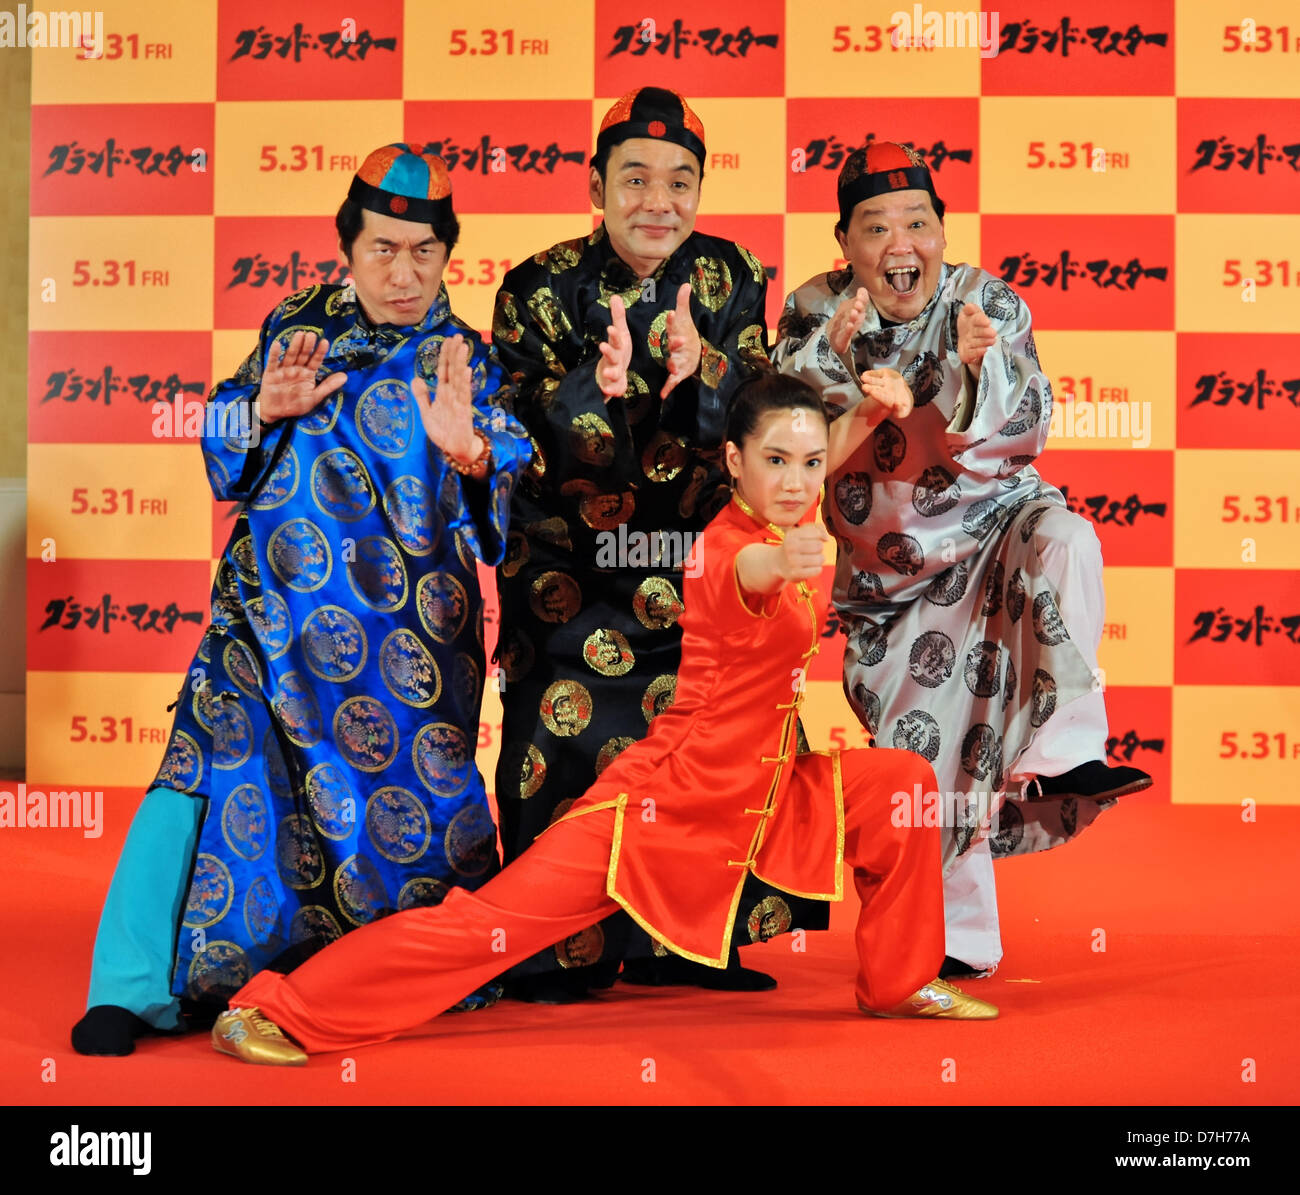 Tokyo, Japan. 7th May 2013. Chihiro Yamamoto and Dacho club. 4th World Youth Martial Arts Championship's medalist Chihiro Yamamoto(front  C) and Comedian Group 'Dacho Club' (Rear, L-R, Jimon Terakado, Katsuhiro Higo, Ryuhei Ueshima) attend an event for 'The Grandmaster' in Tokyo, Japan, on May 7, 2013. The film will open on May 31 in Japan. (Photo by AFLO/Alamy Live News) Stock Photo